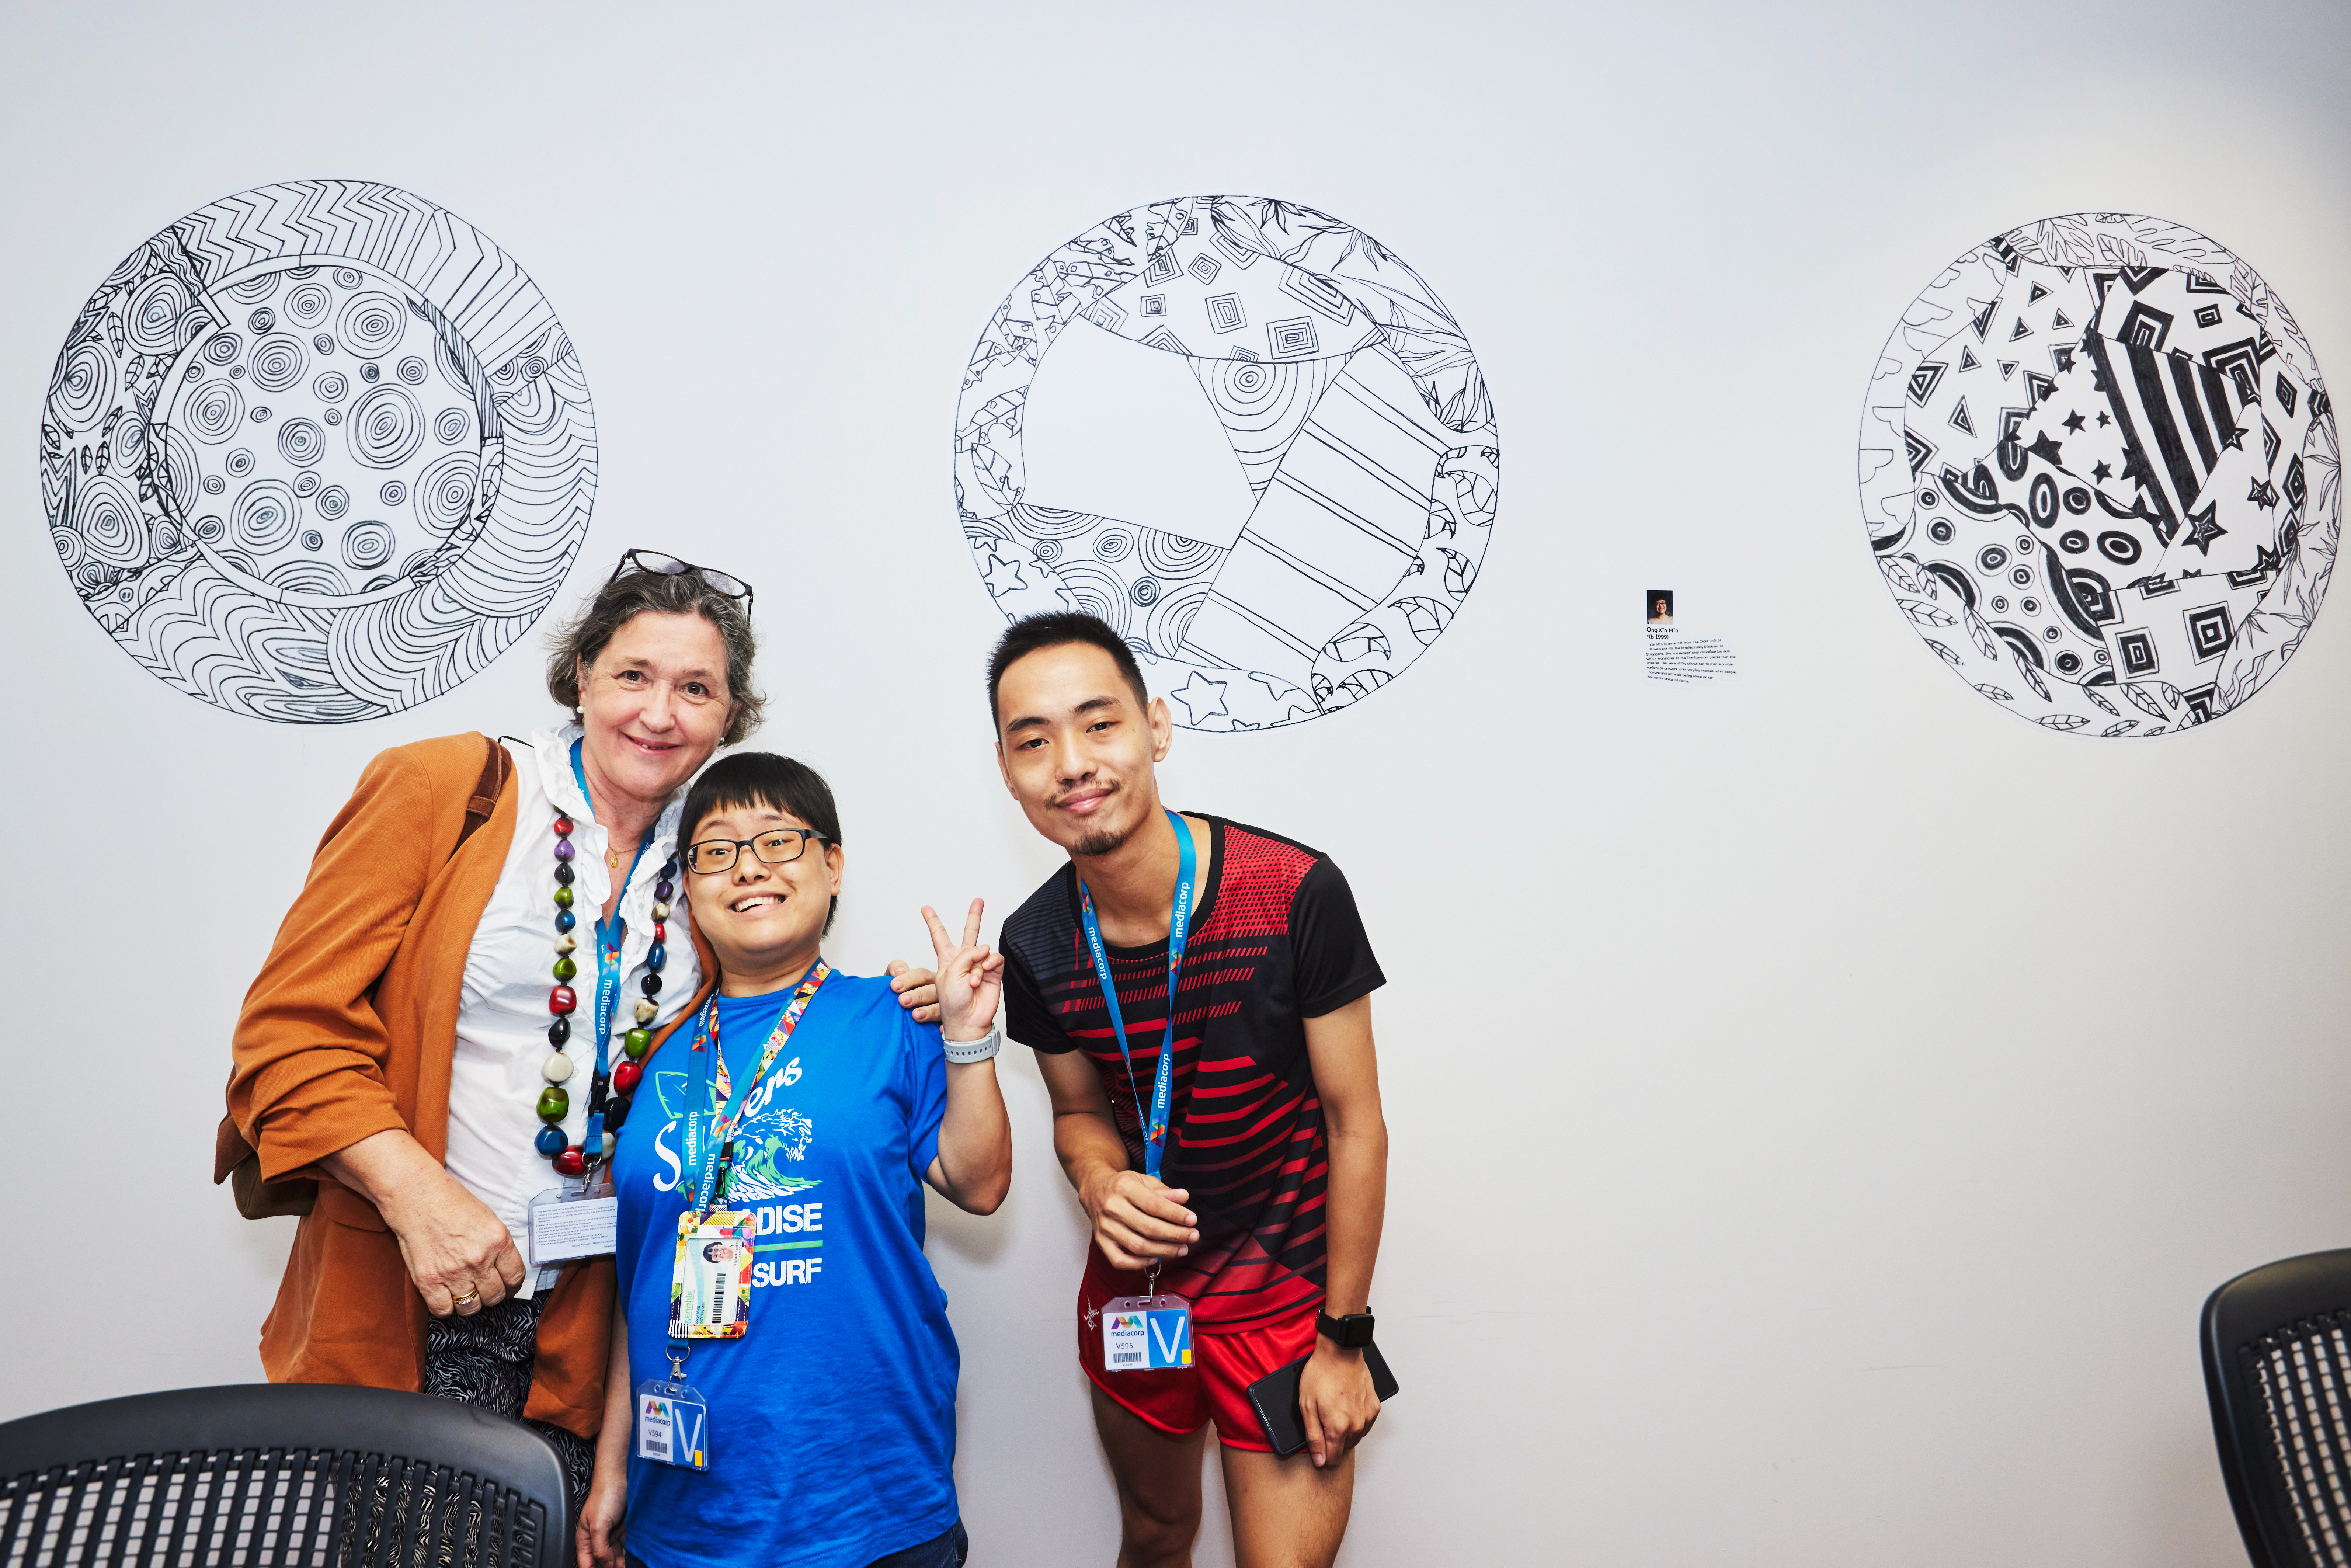 Ong Xin Min - Artist from MINDS, poses with hand in 2 finger peace sign with her brother and Dr Esther in front of circular wall sticker murals of intricate lines and patterns 